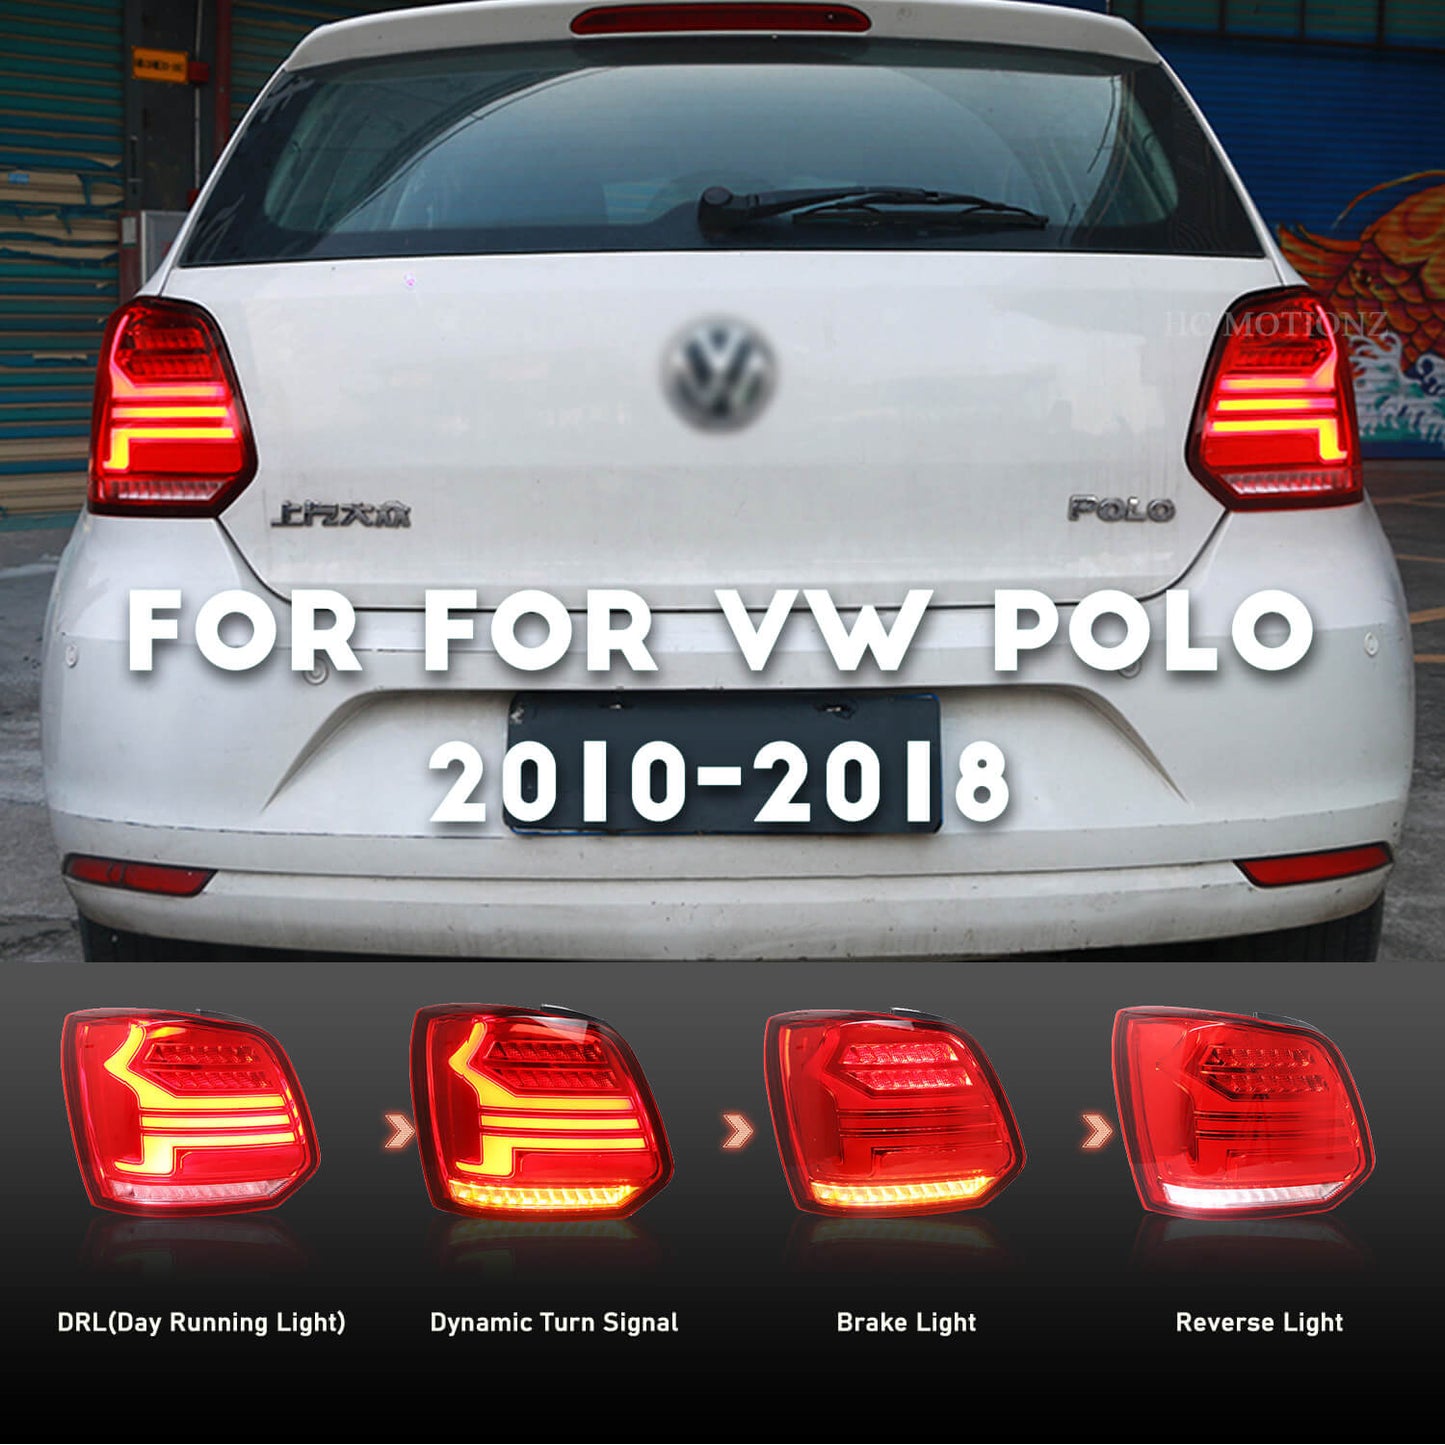 HCMOTION 2010-2018 LED Tail Lamp For VW Polo